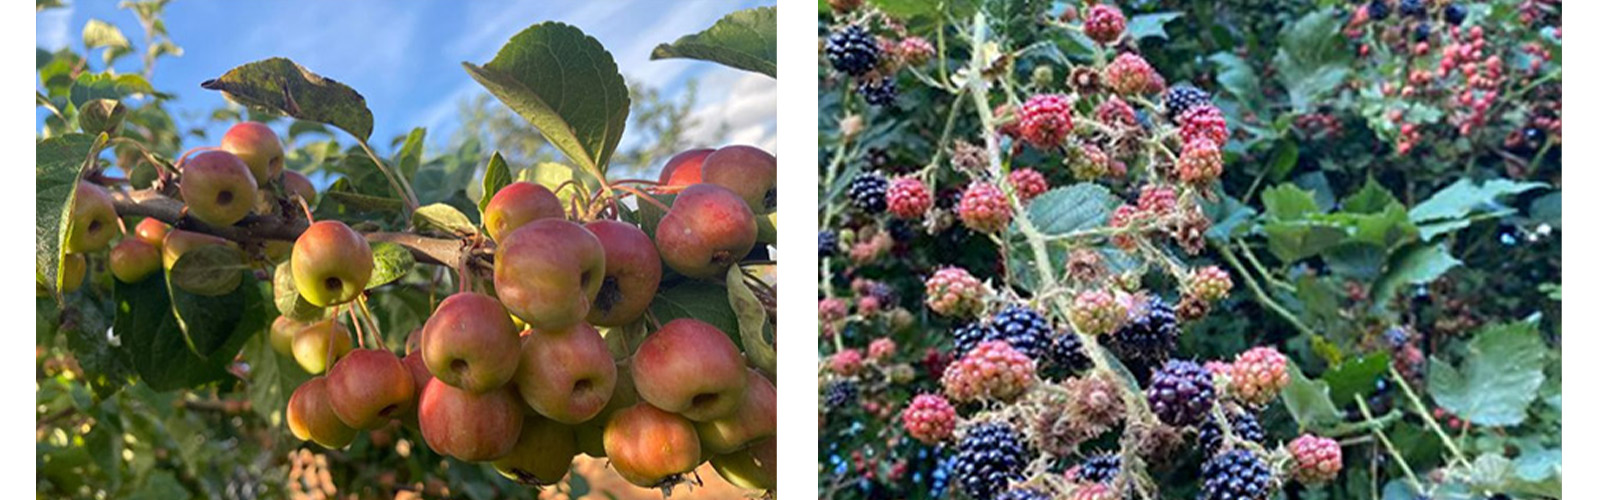 autumn fruits - apples and blackberries